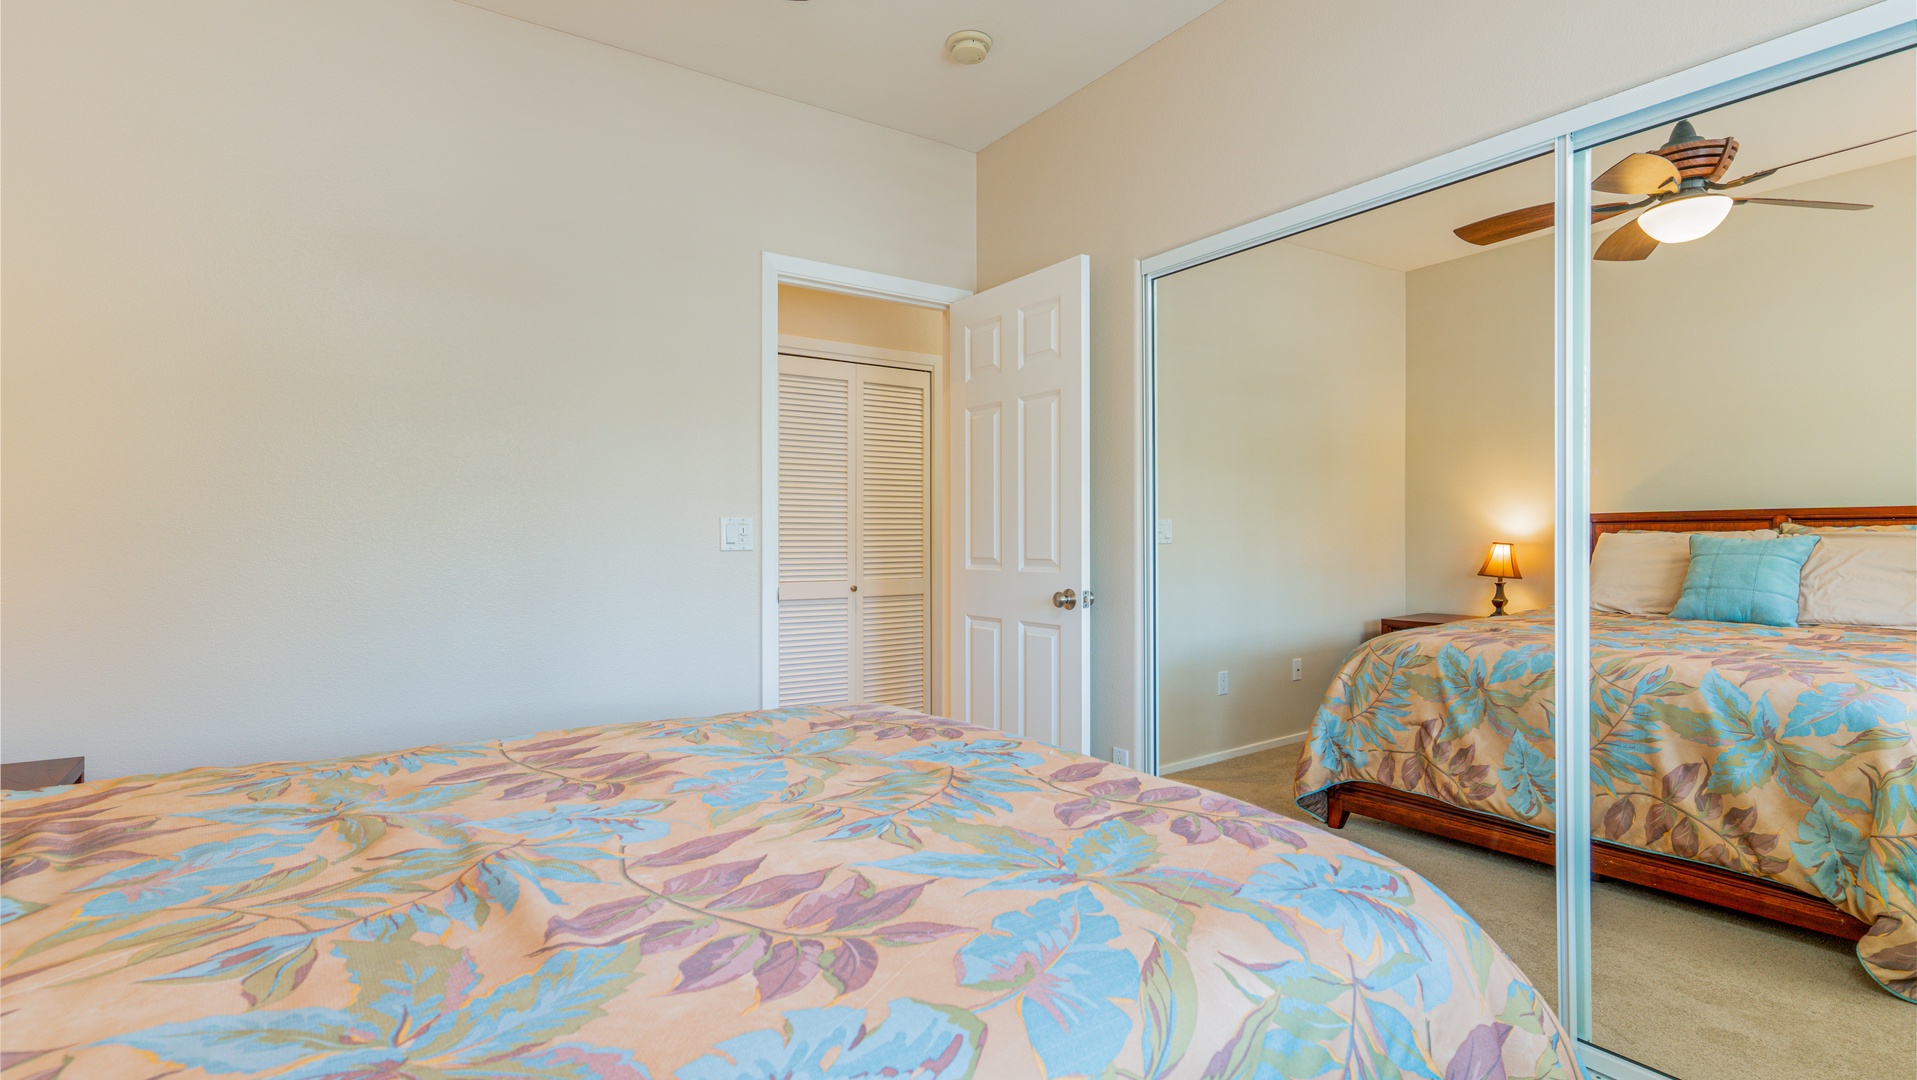 Kapolei Vacation Rentals, Coconut Plantation 1234-2 - The third guest bedroom is comfortable and spacious.